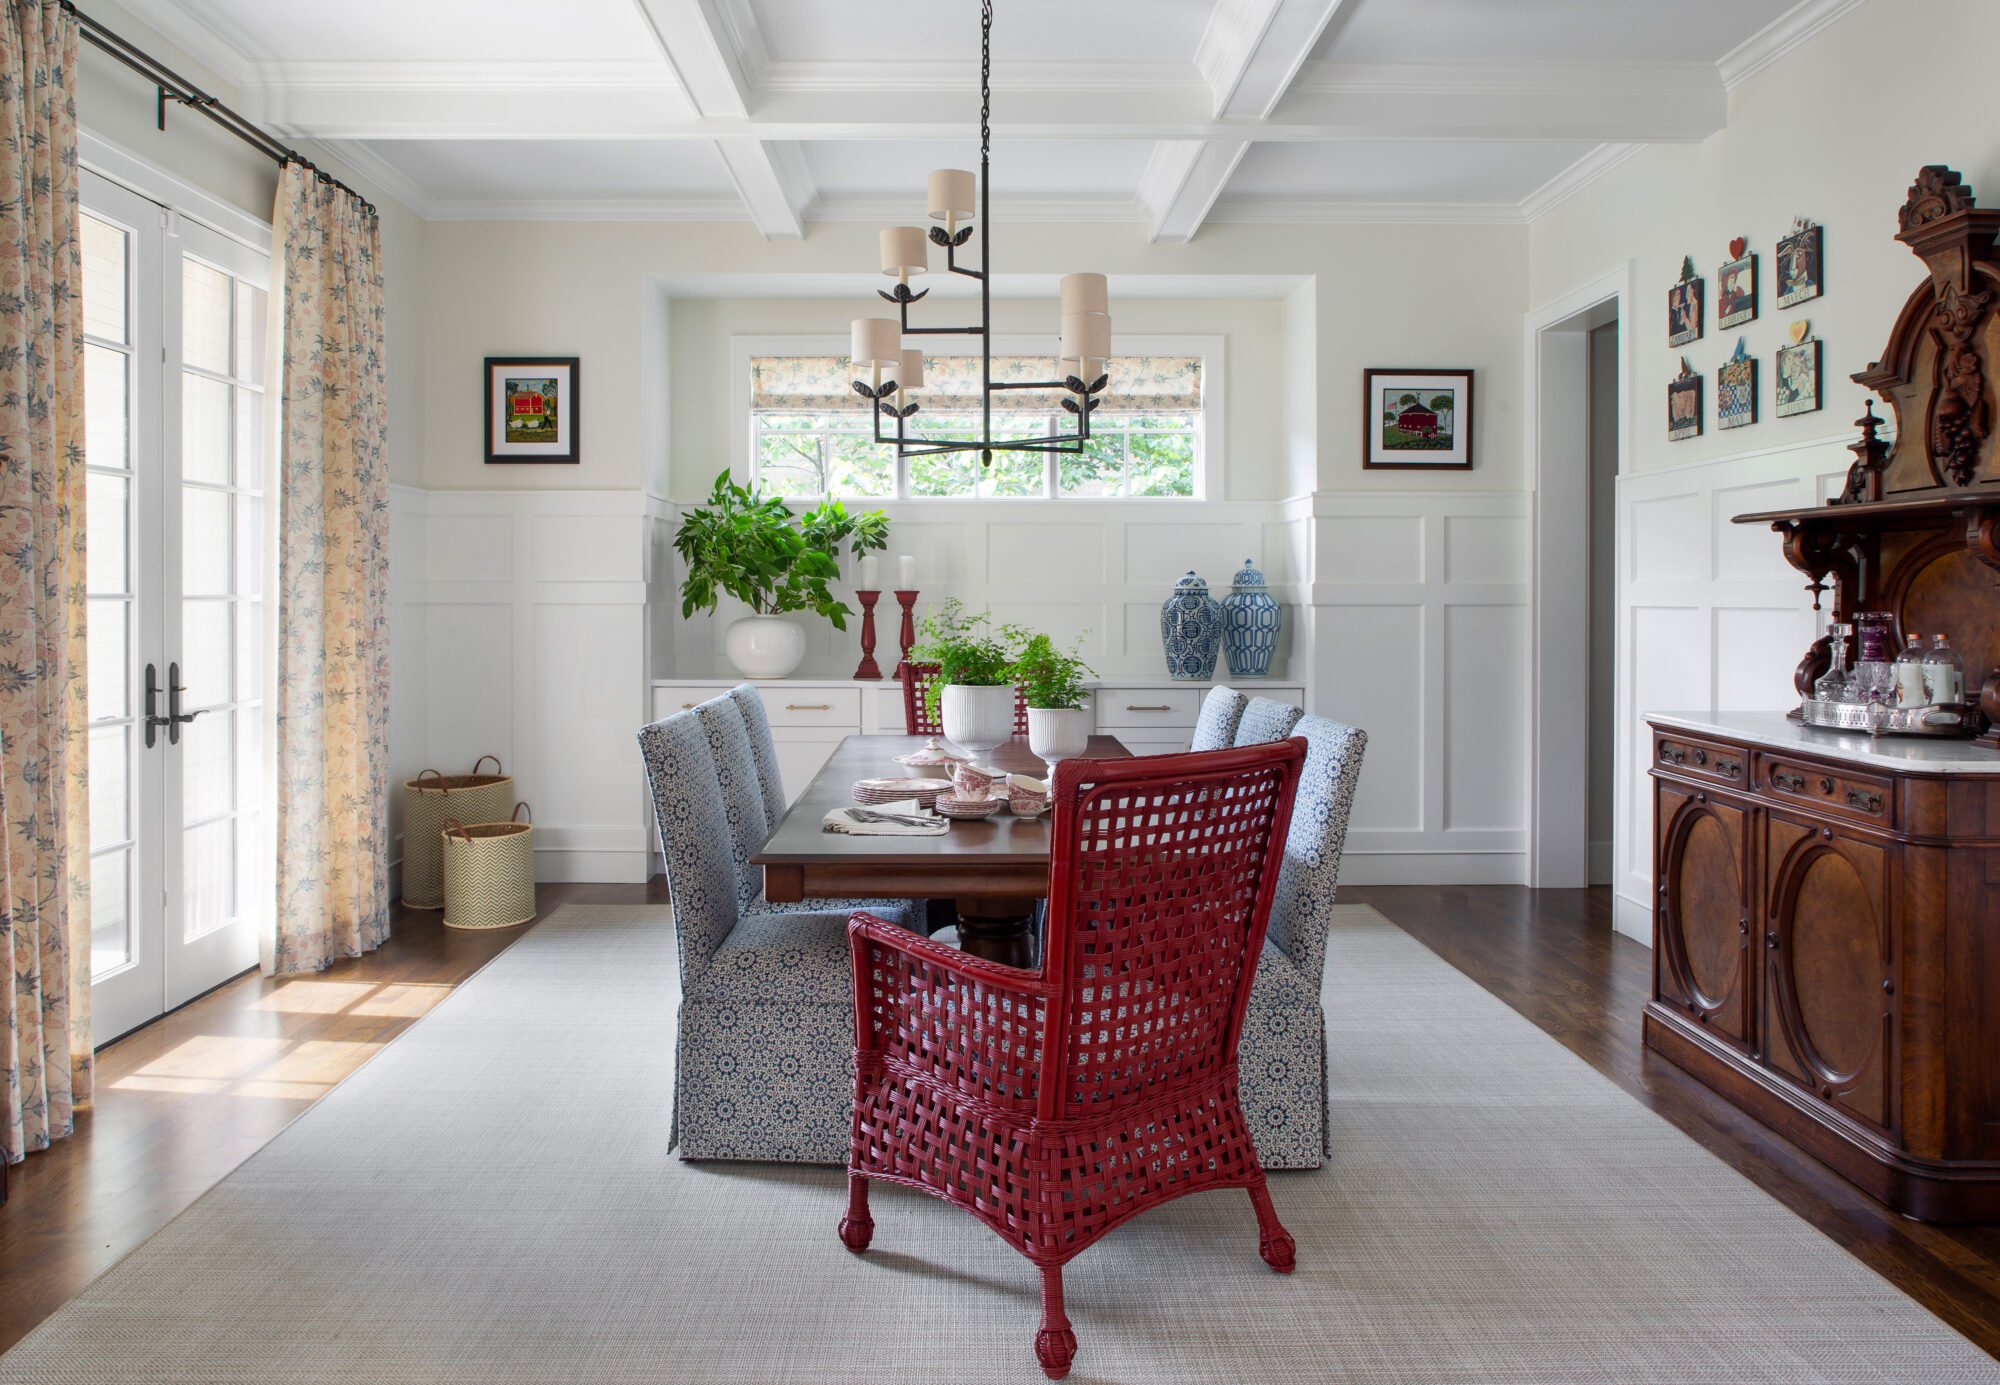 A dining room has a long table with blue dining chairs and red wicker captain chairs.